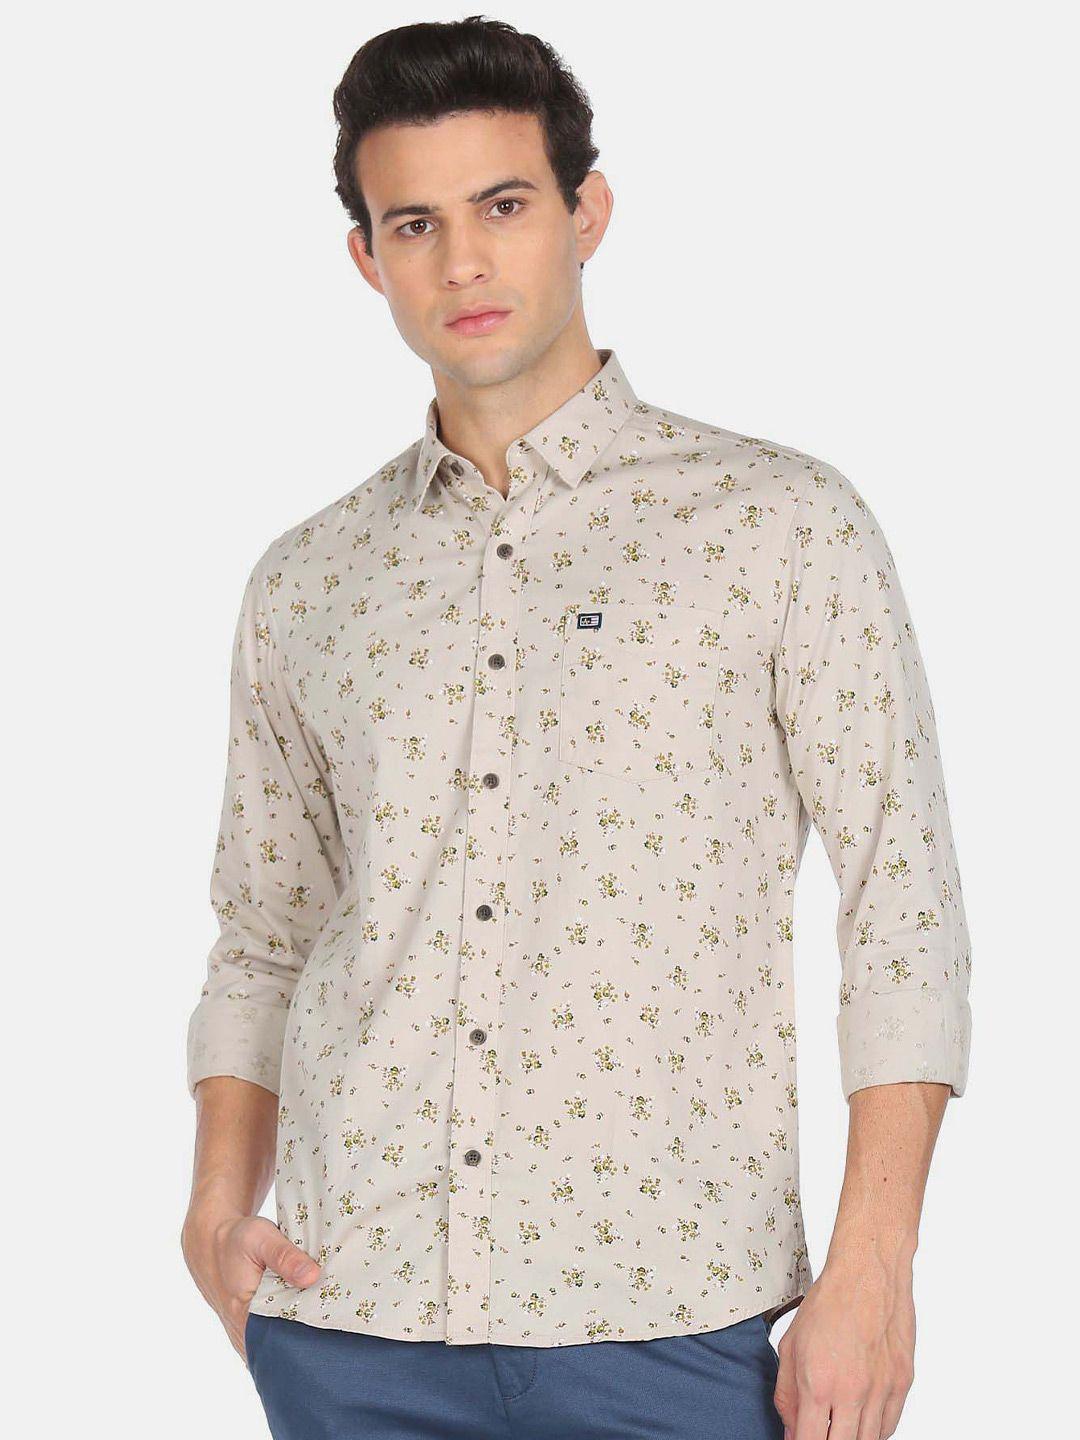 arrow sport floral printed pure cotton slim fit casual shirt